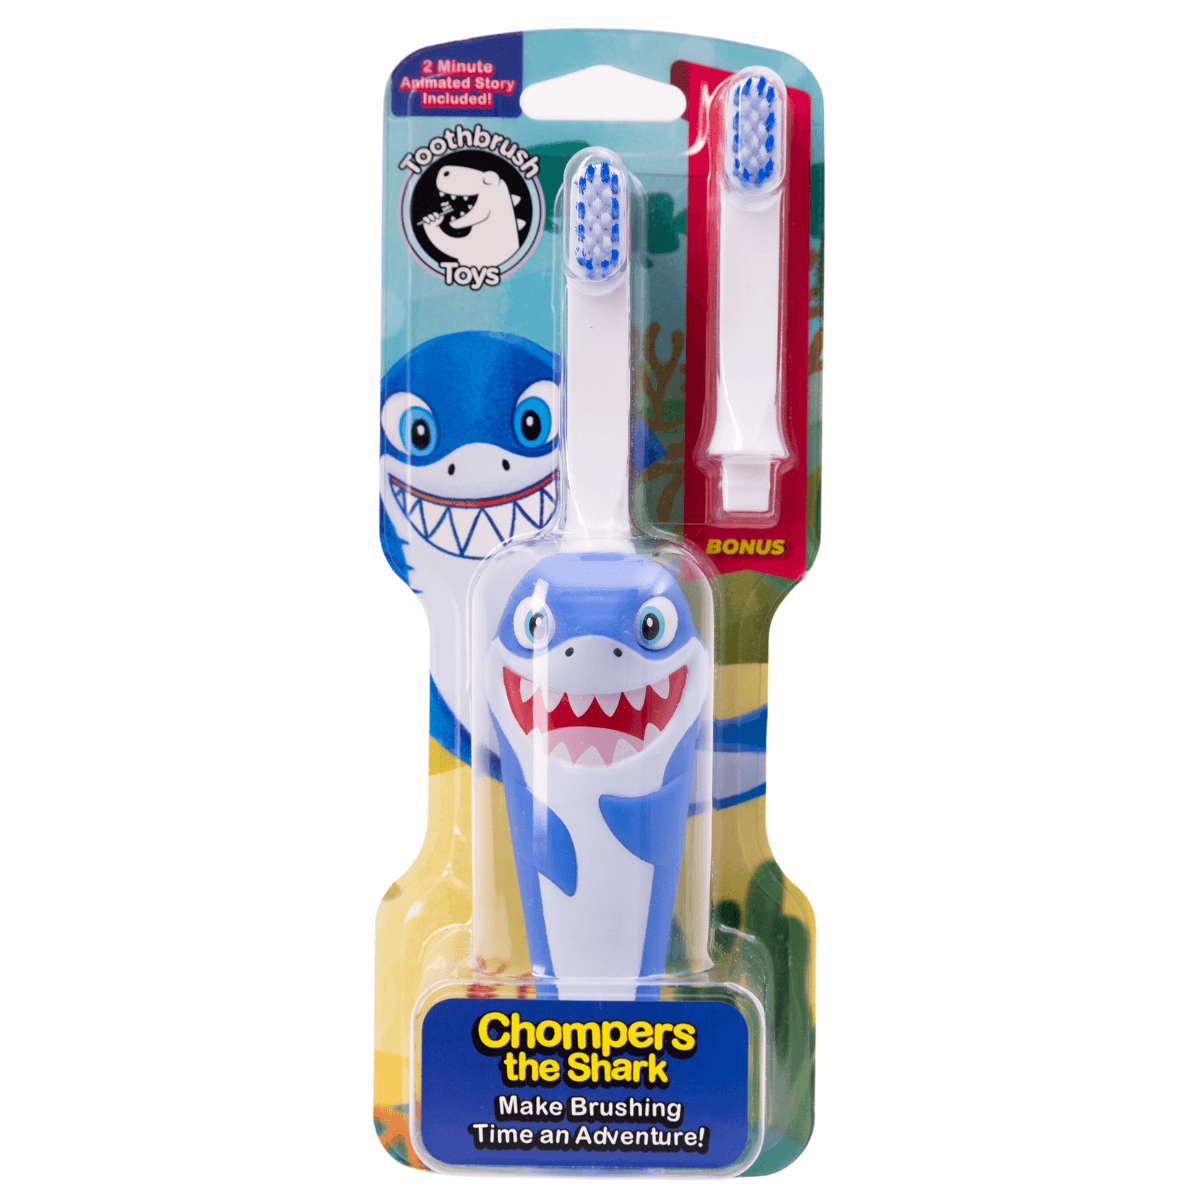 Chompers the Shark toothbrush in its original packaging